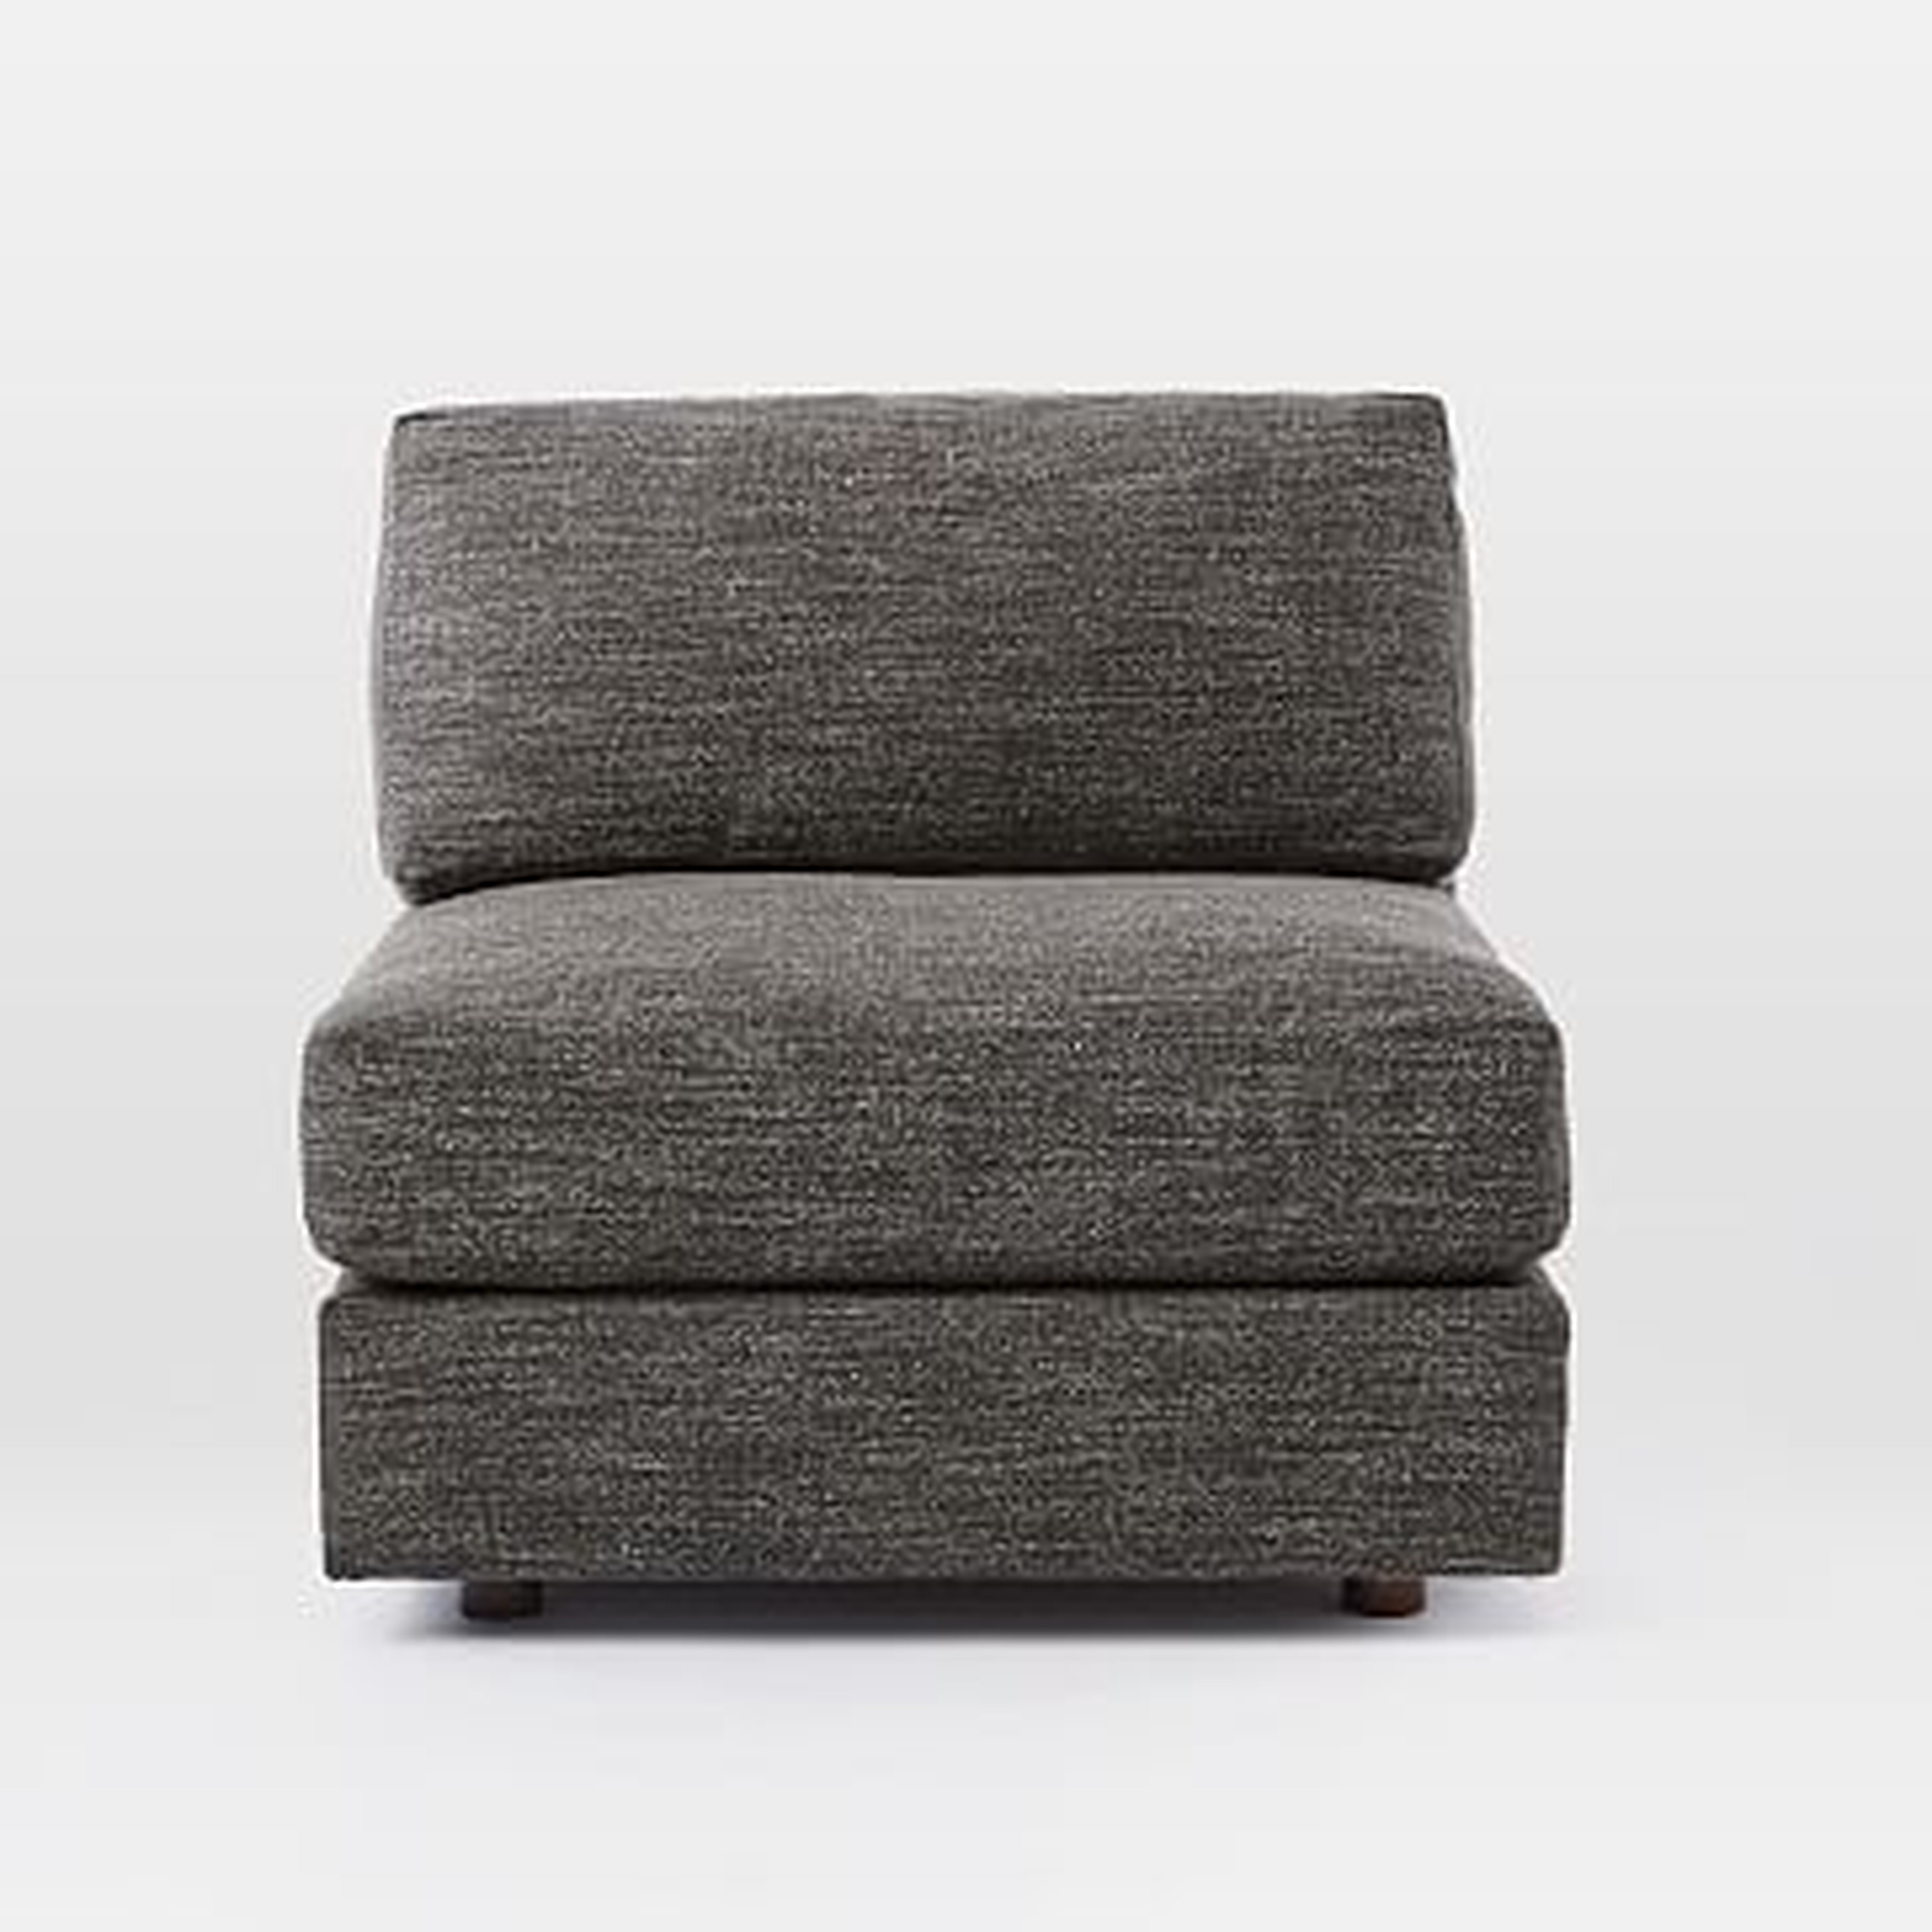 Urban Armless Chair, Heathered Tweed Charcoal, Down Fill - West Elm